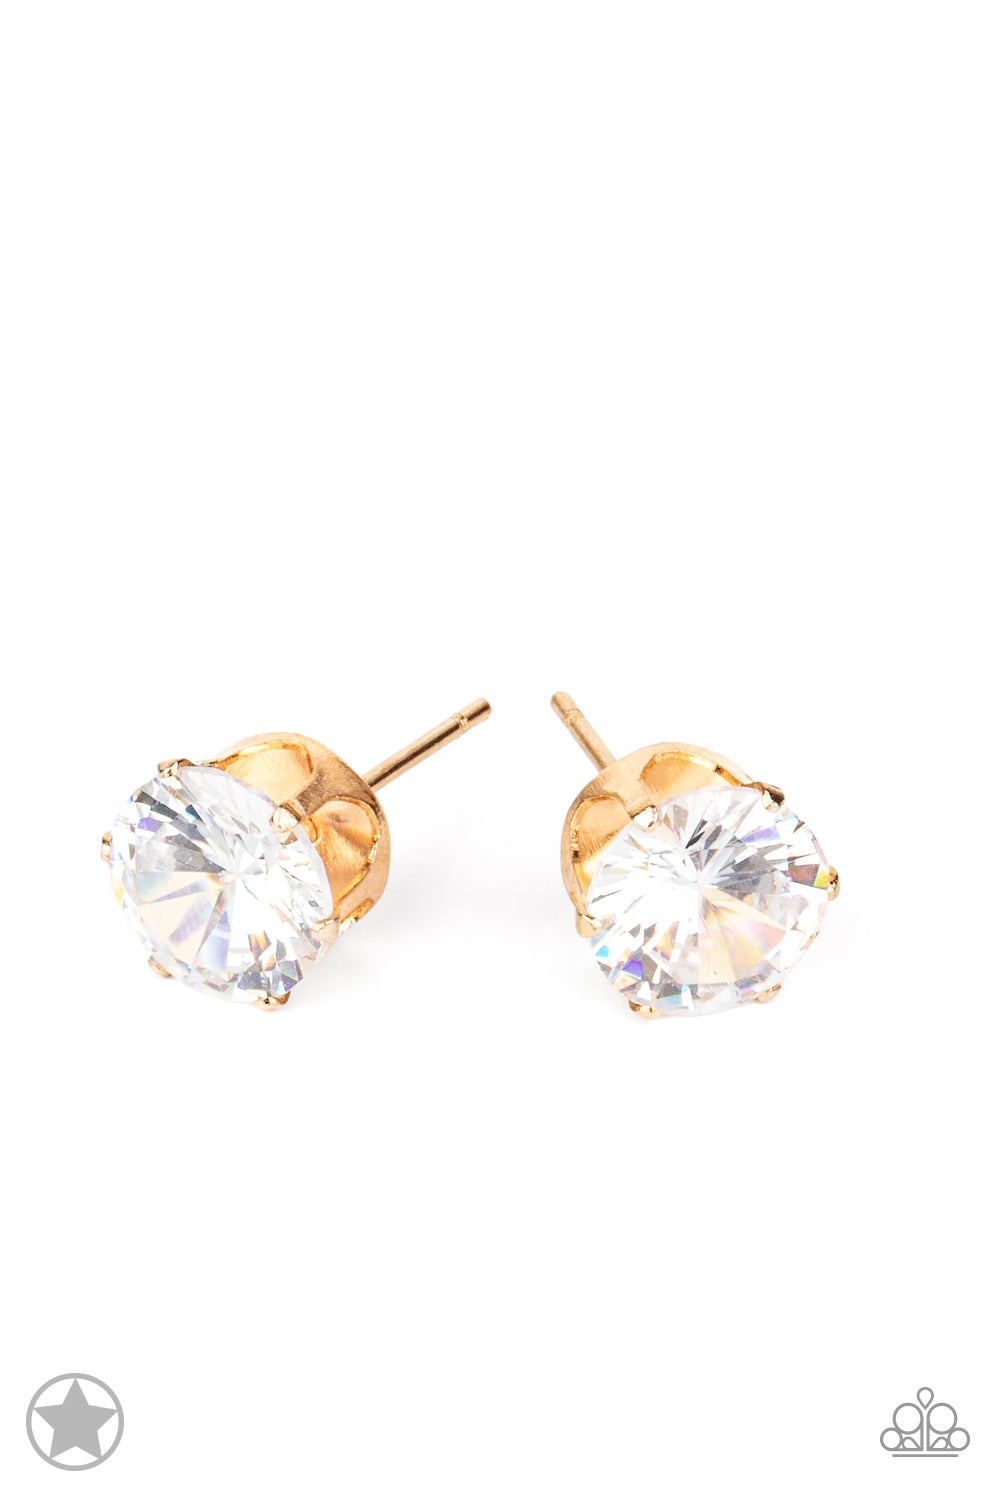 Just in Timeless White Rhinestone and Gold Post Earrings - Paparazzi Accessories - lightbox -CarasShop.com - $5 Jewelry by Cara Jewels